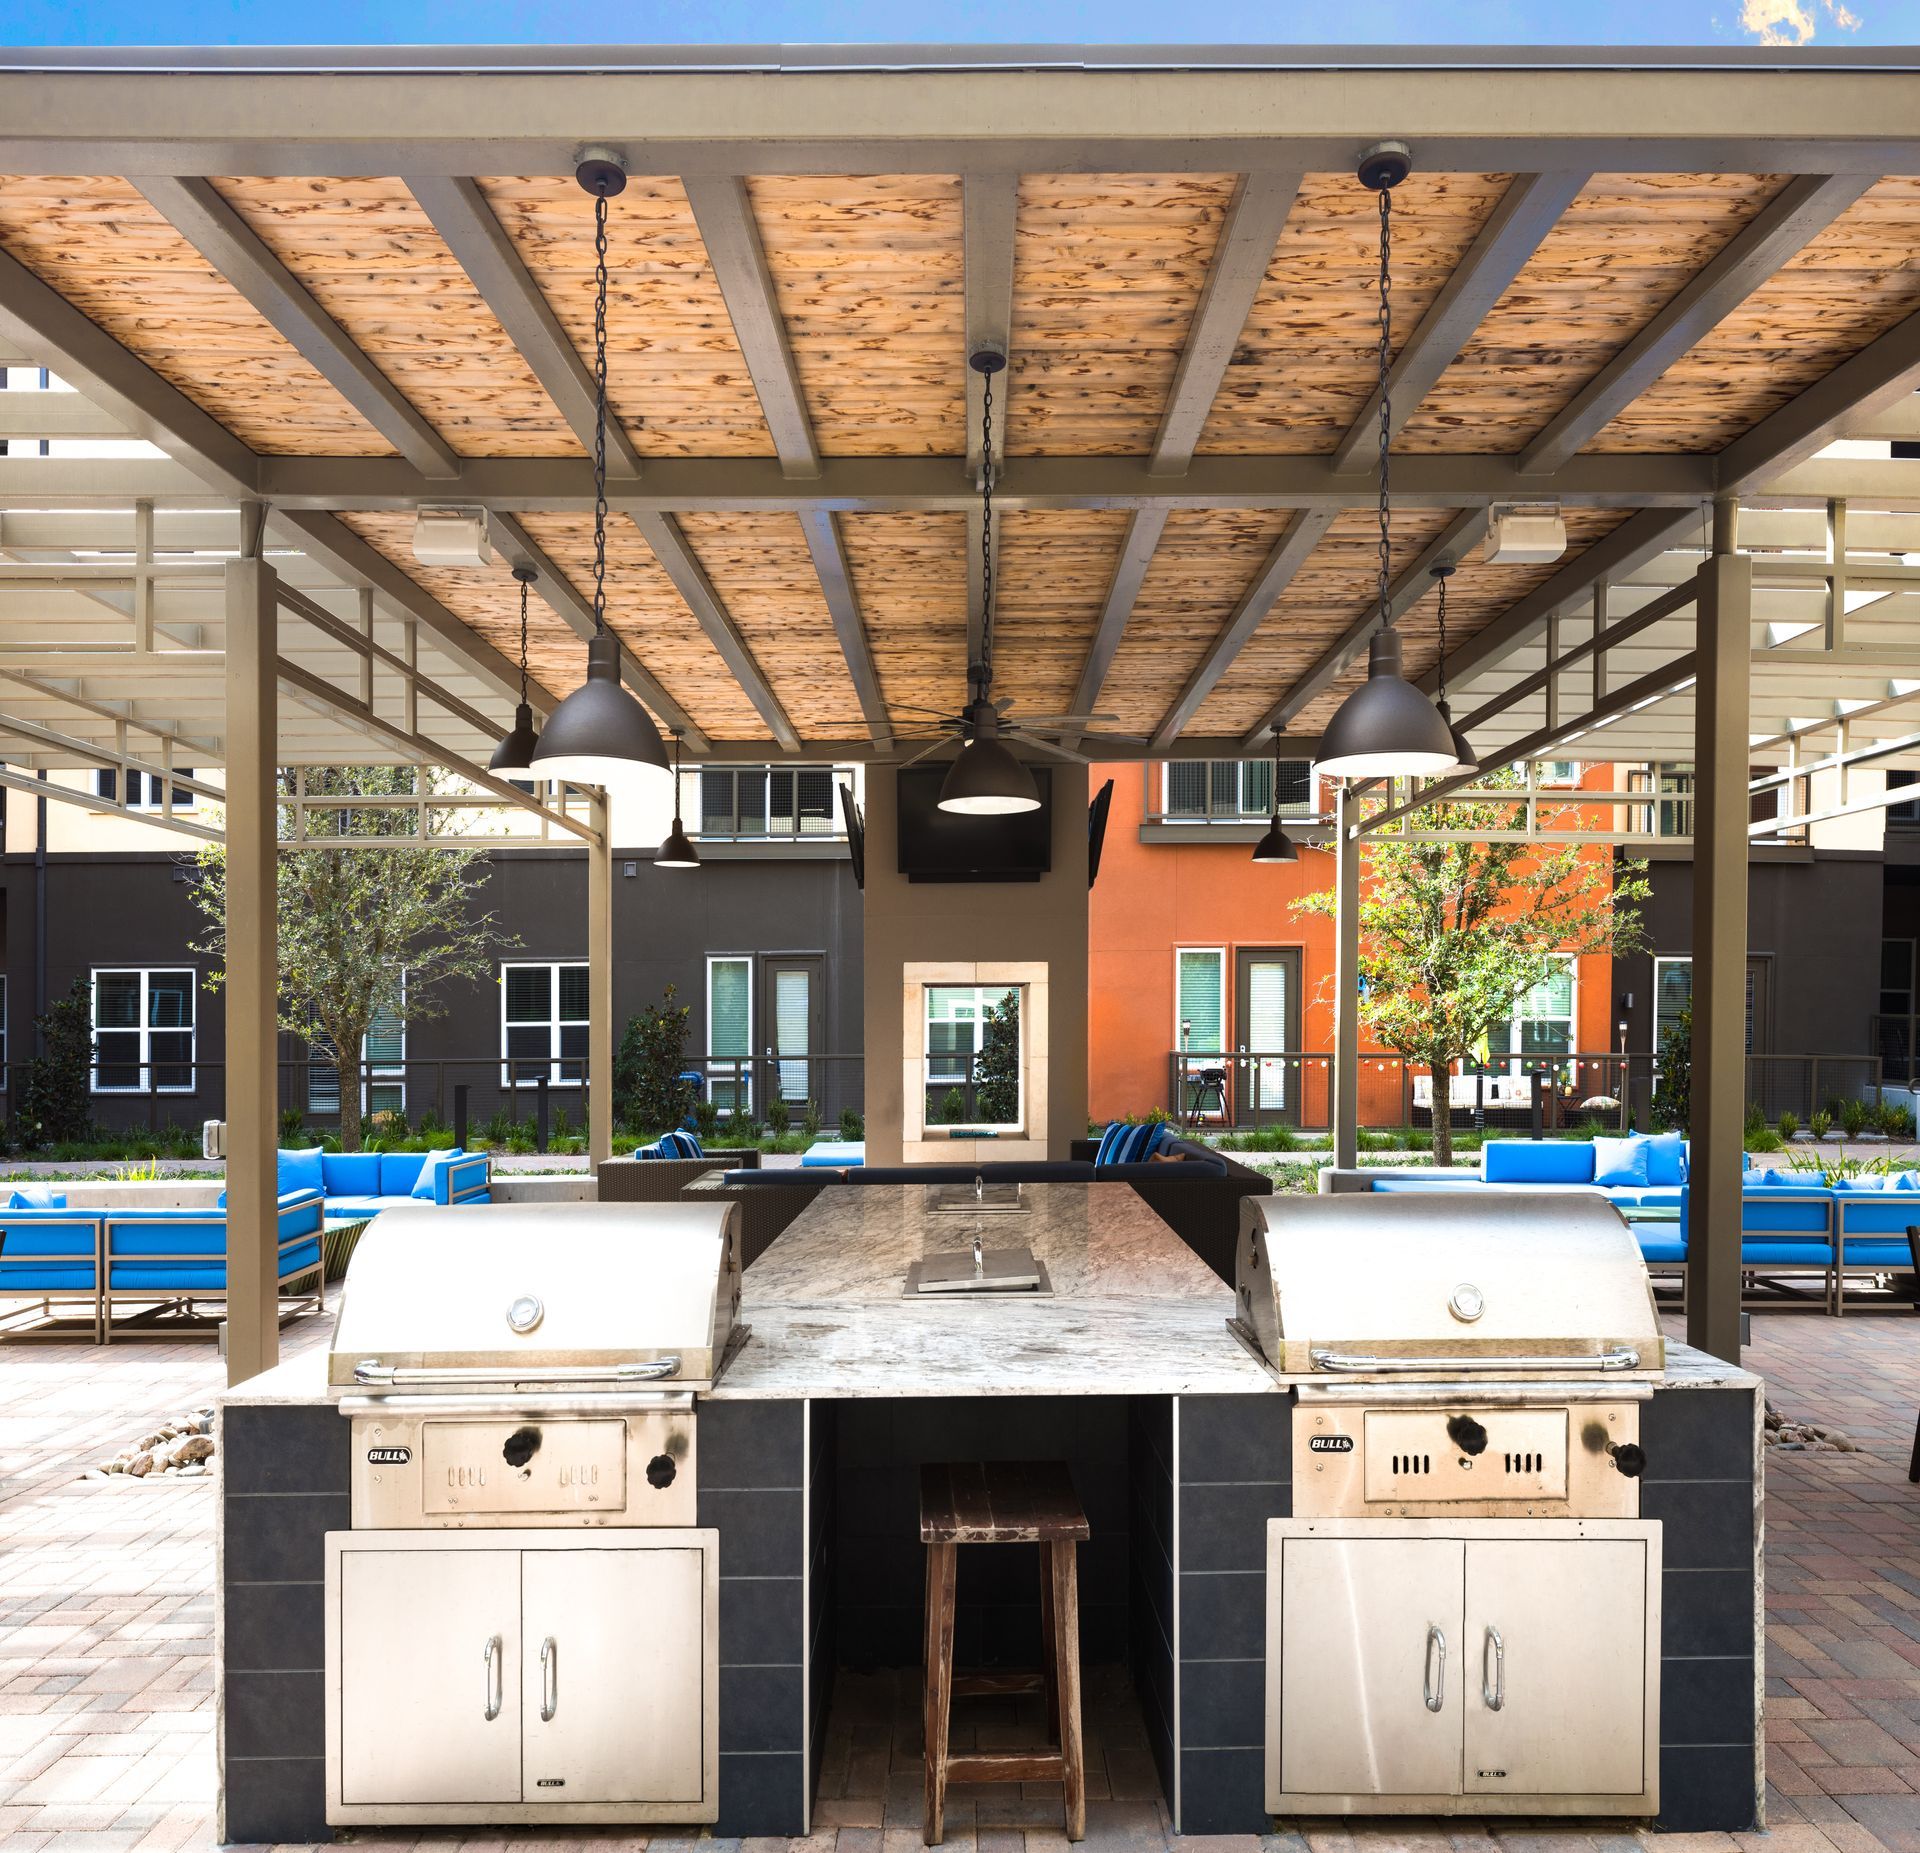 An outdoor kitchen with two grills under a pergola at Parkside at Craig Ranch.